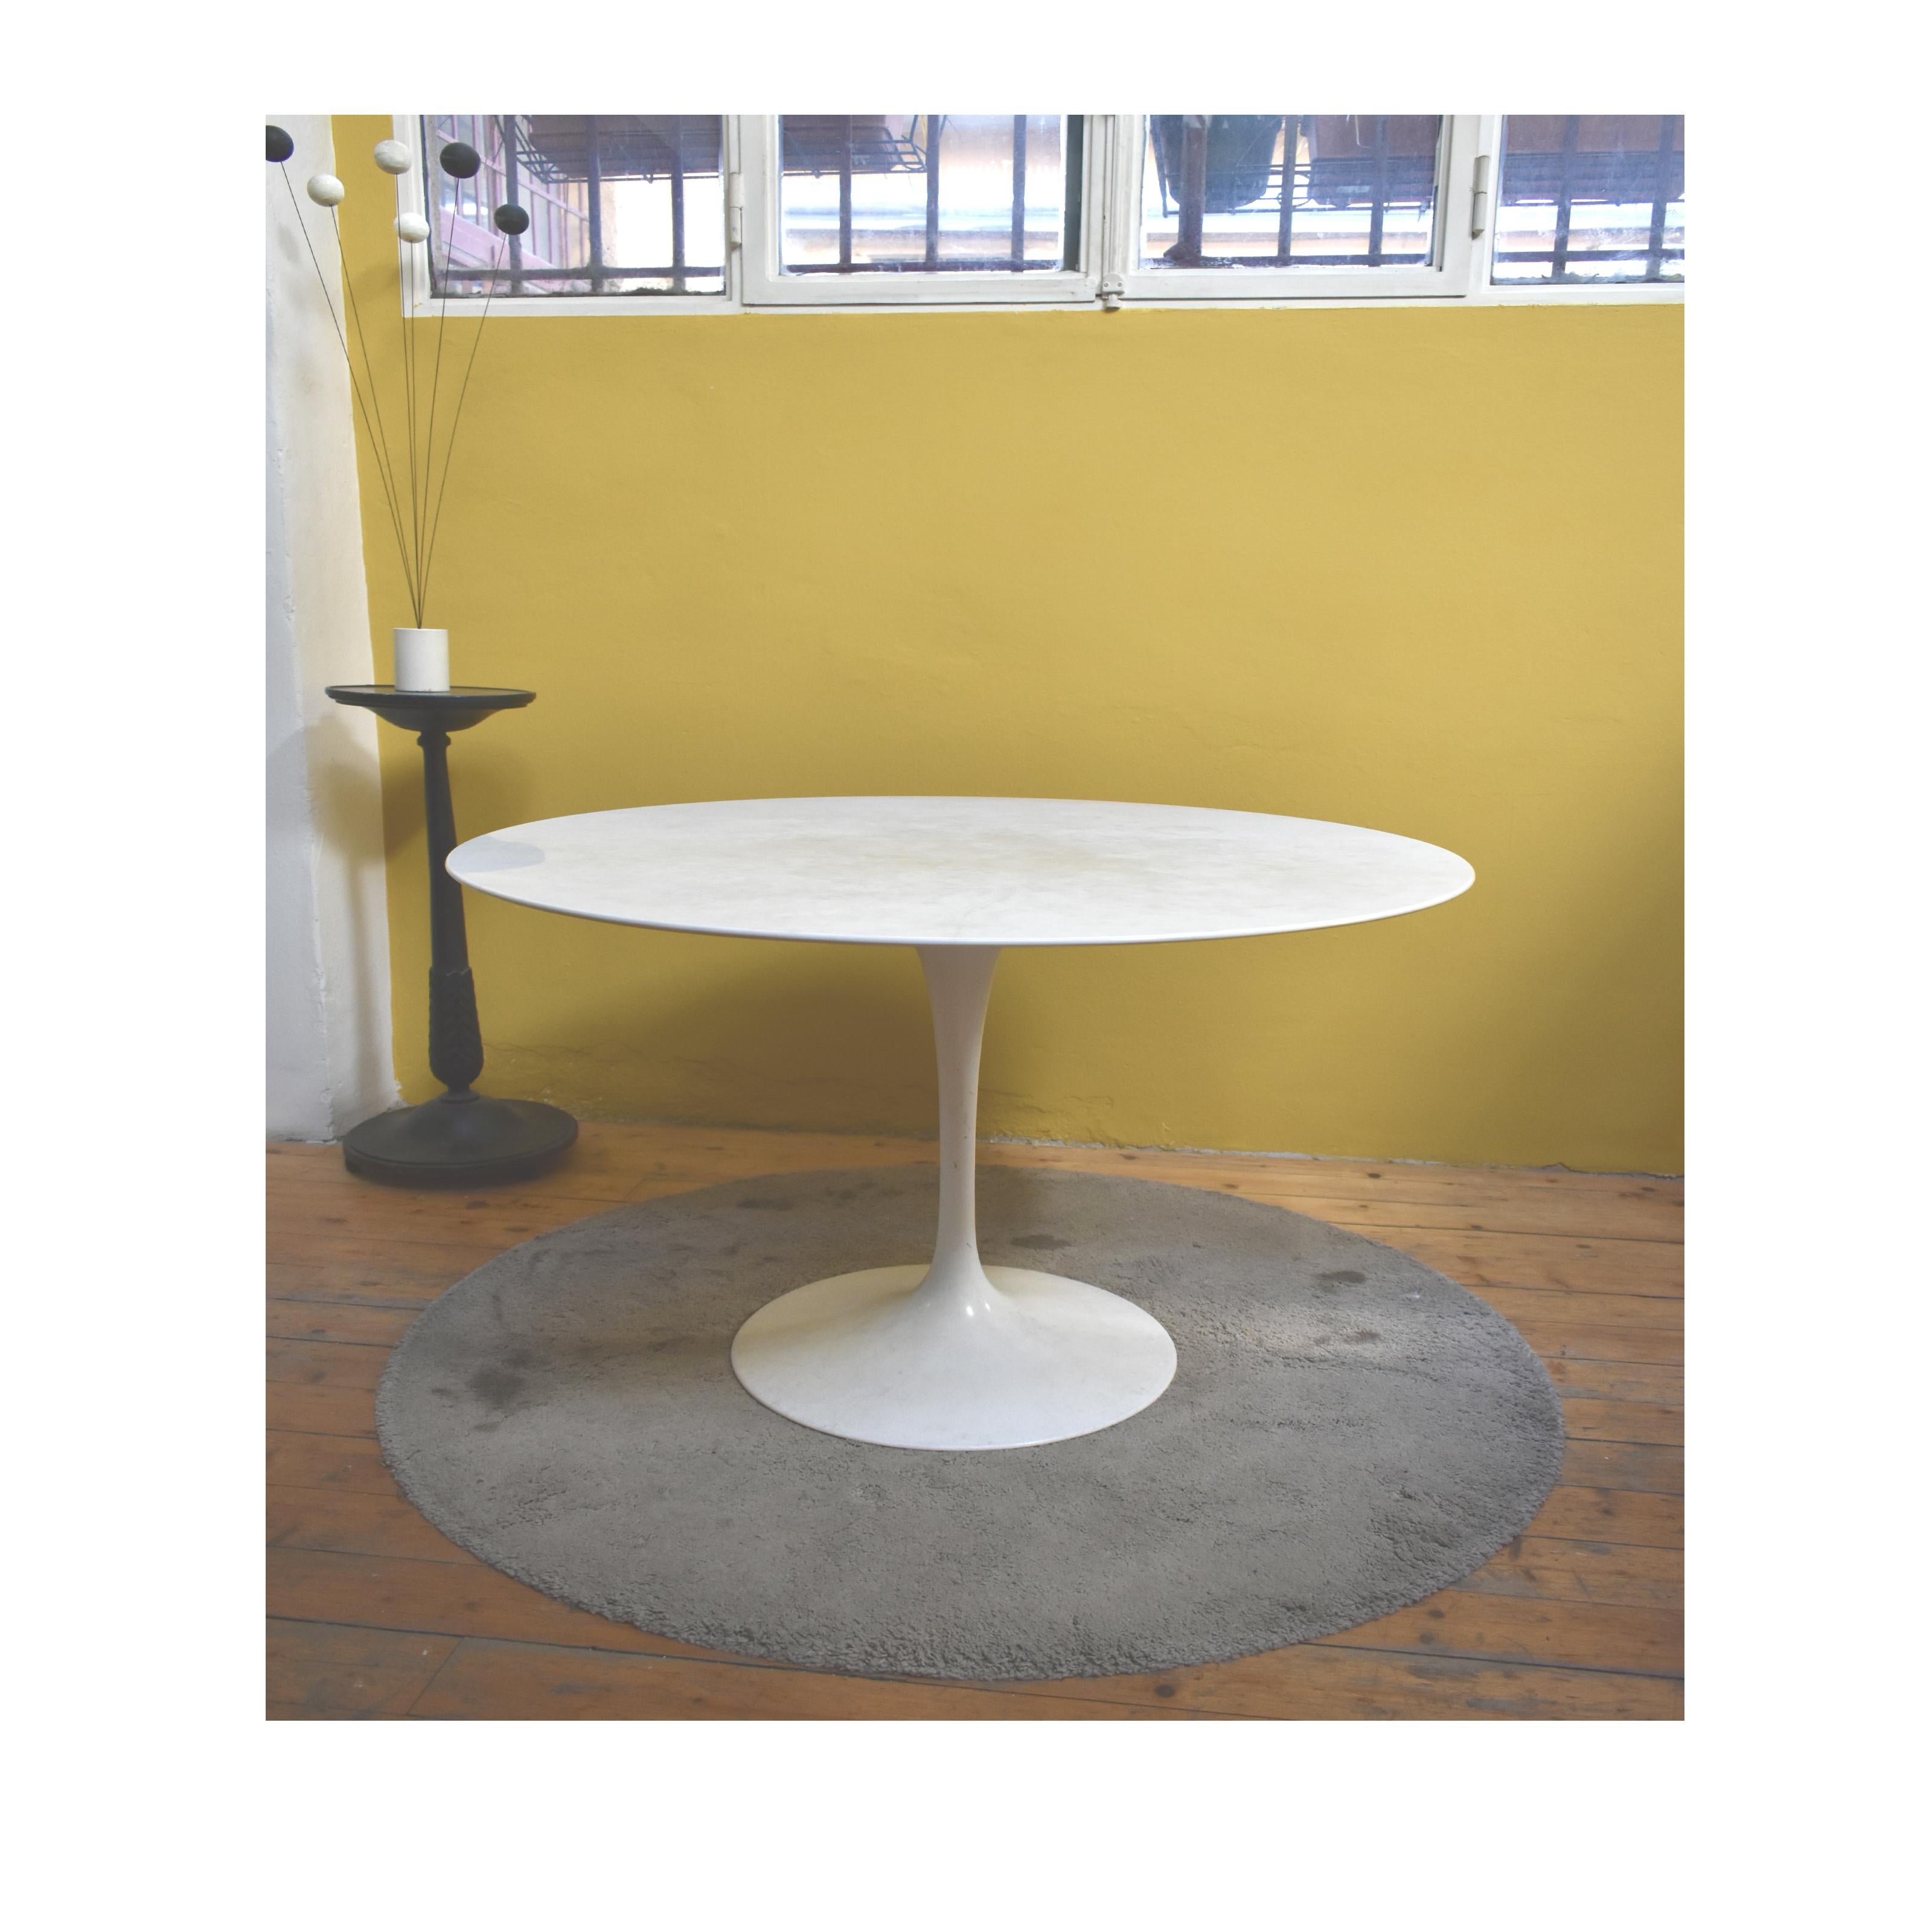 Tulip, Eero Saarinen Pedestal round table, by knoll, 1970.
Round table, with marble top and white aluminum structure.
Design by Eero Saarinen for Knoll.
Dimensions
Height: 70cm
Diameter: 107cm
Condition
There is a stain and a scratch on the marble